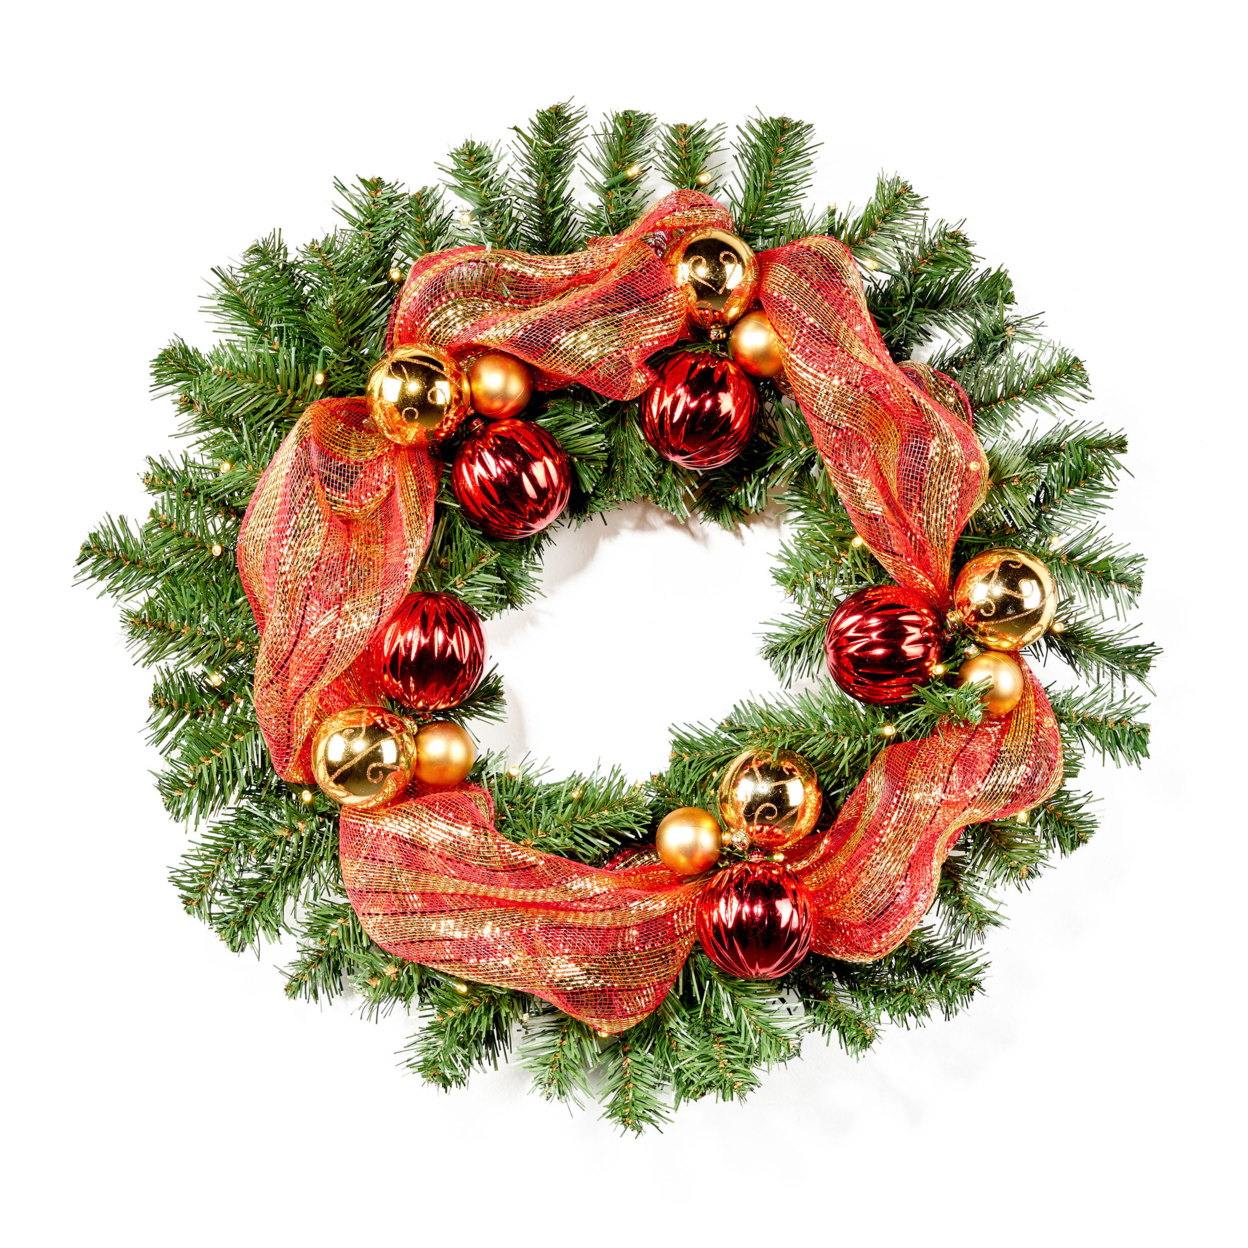 24-inch Fir Pre-Lit Warm White LED Pre-Decorated Artificial Christmas Wreath